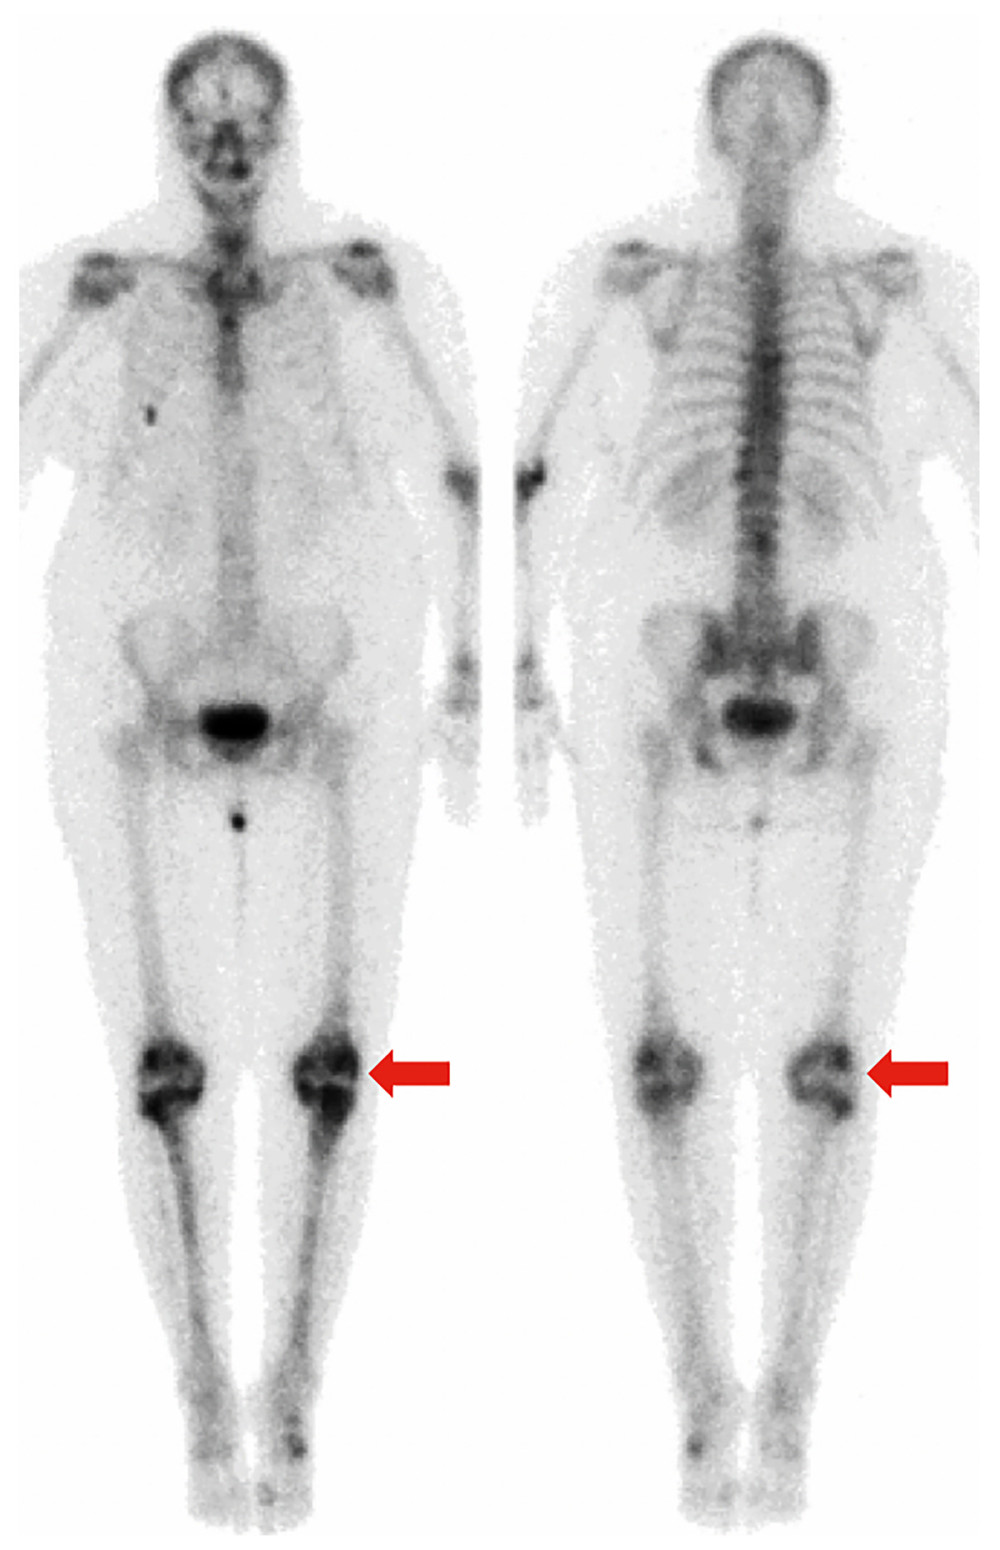 99mTc-MDP bone scintigraphy showing radiotracer uptake in the bilateral knees suggestive of degenerative changes (arrows). There is no radiotracer uptake in the pelvis or proximal femur corresponding to the lesions visualized on MRI.